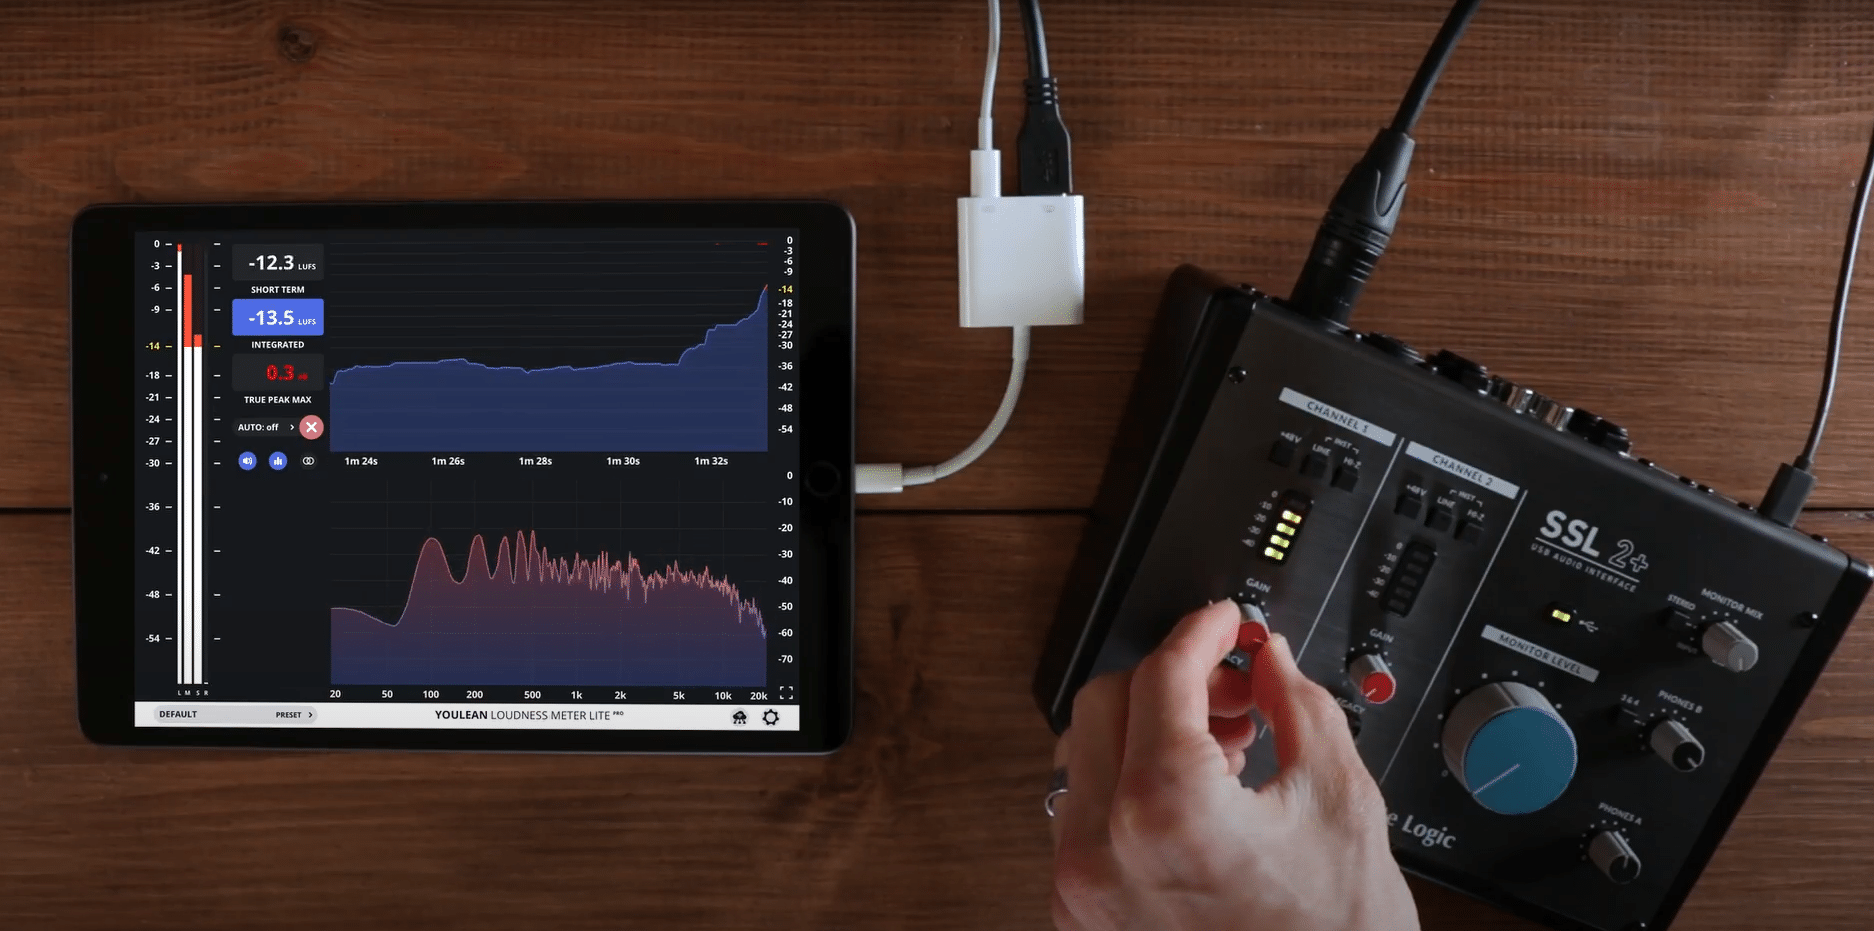 youlean loudness meter lite